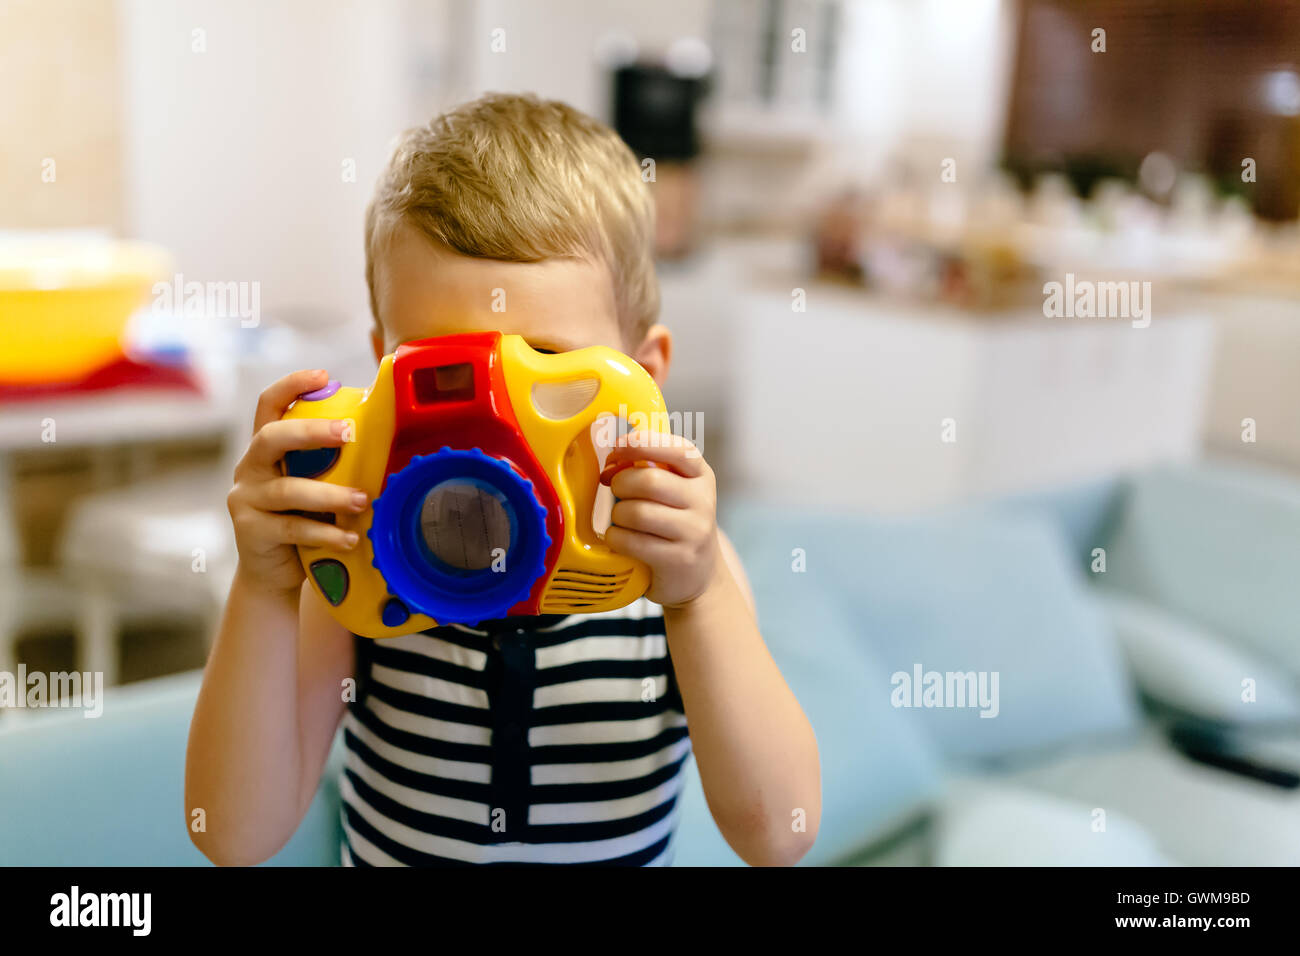 Cute boy wants to become photographer Stock Photo